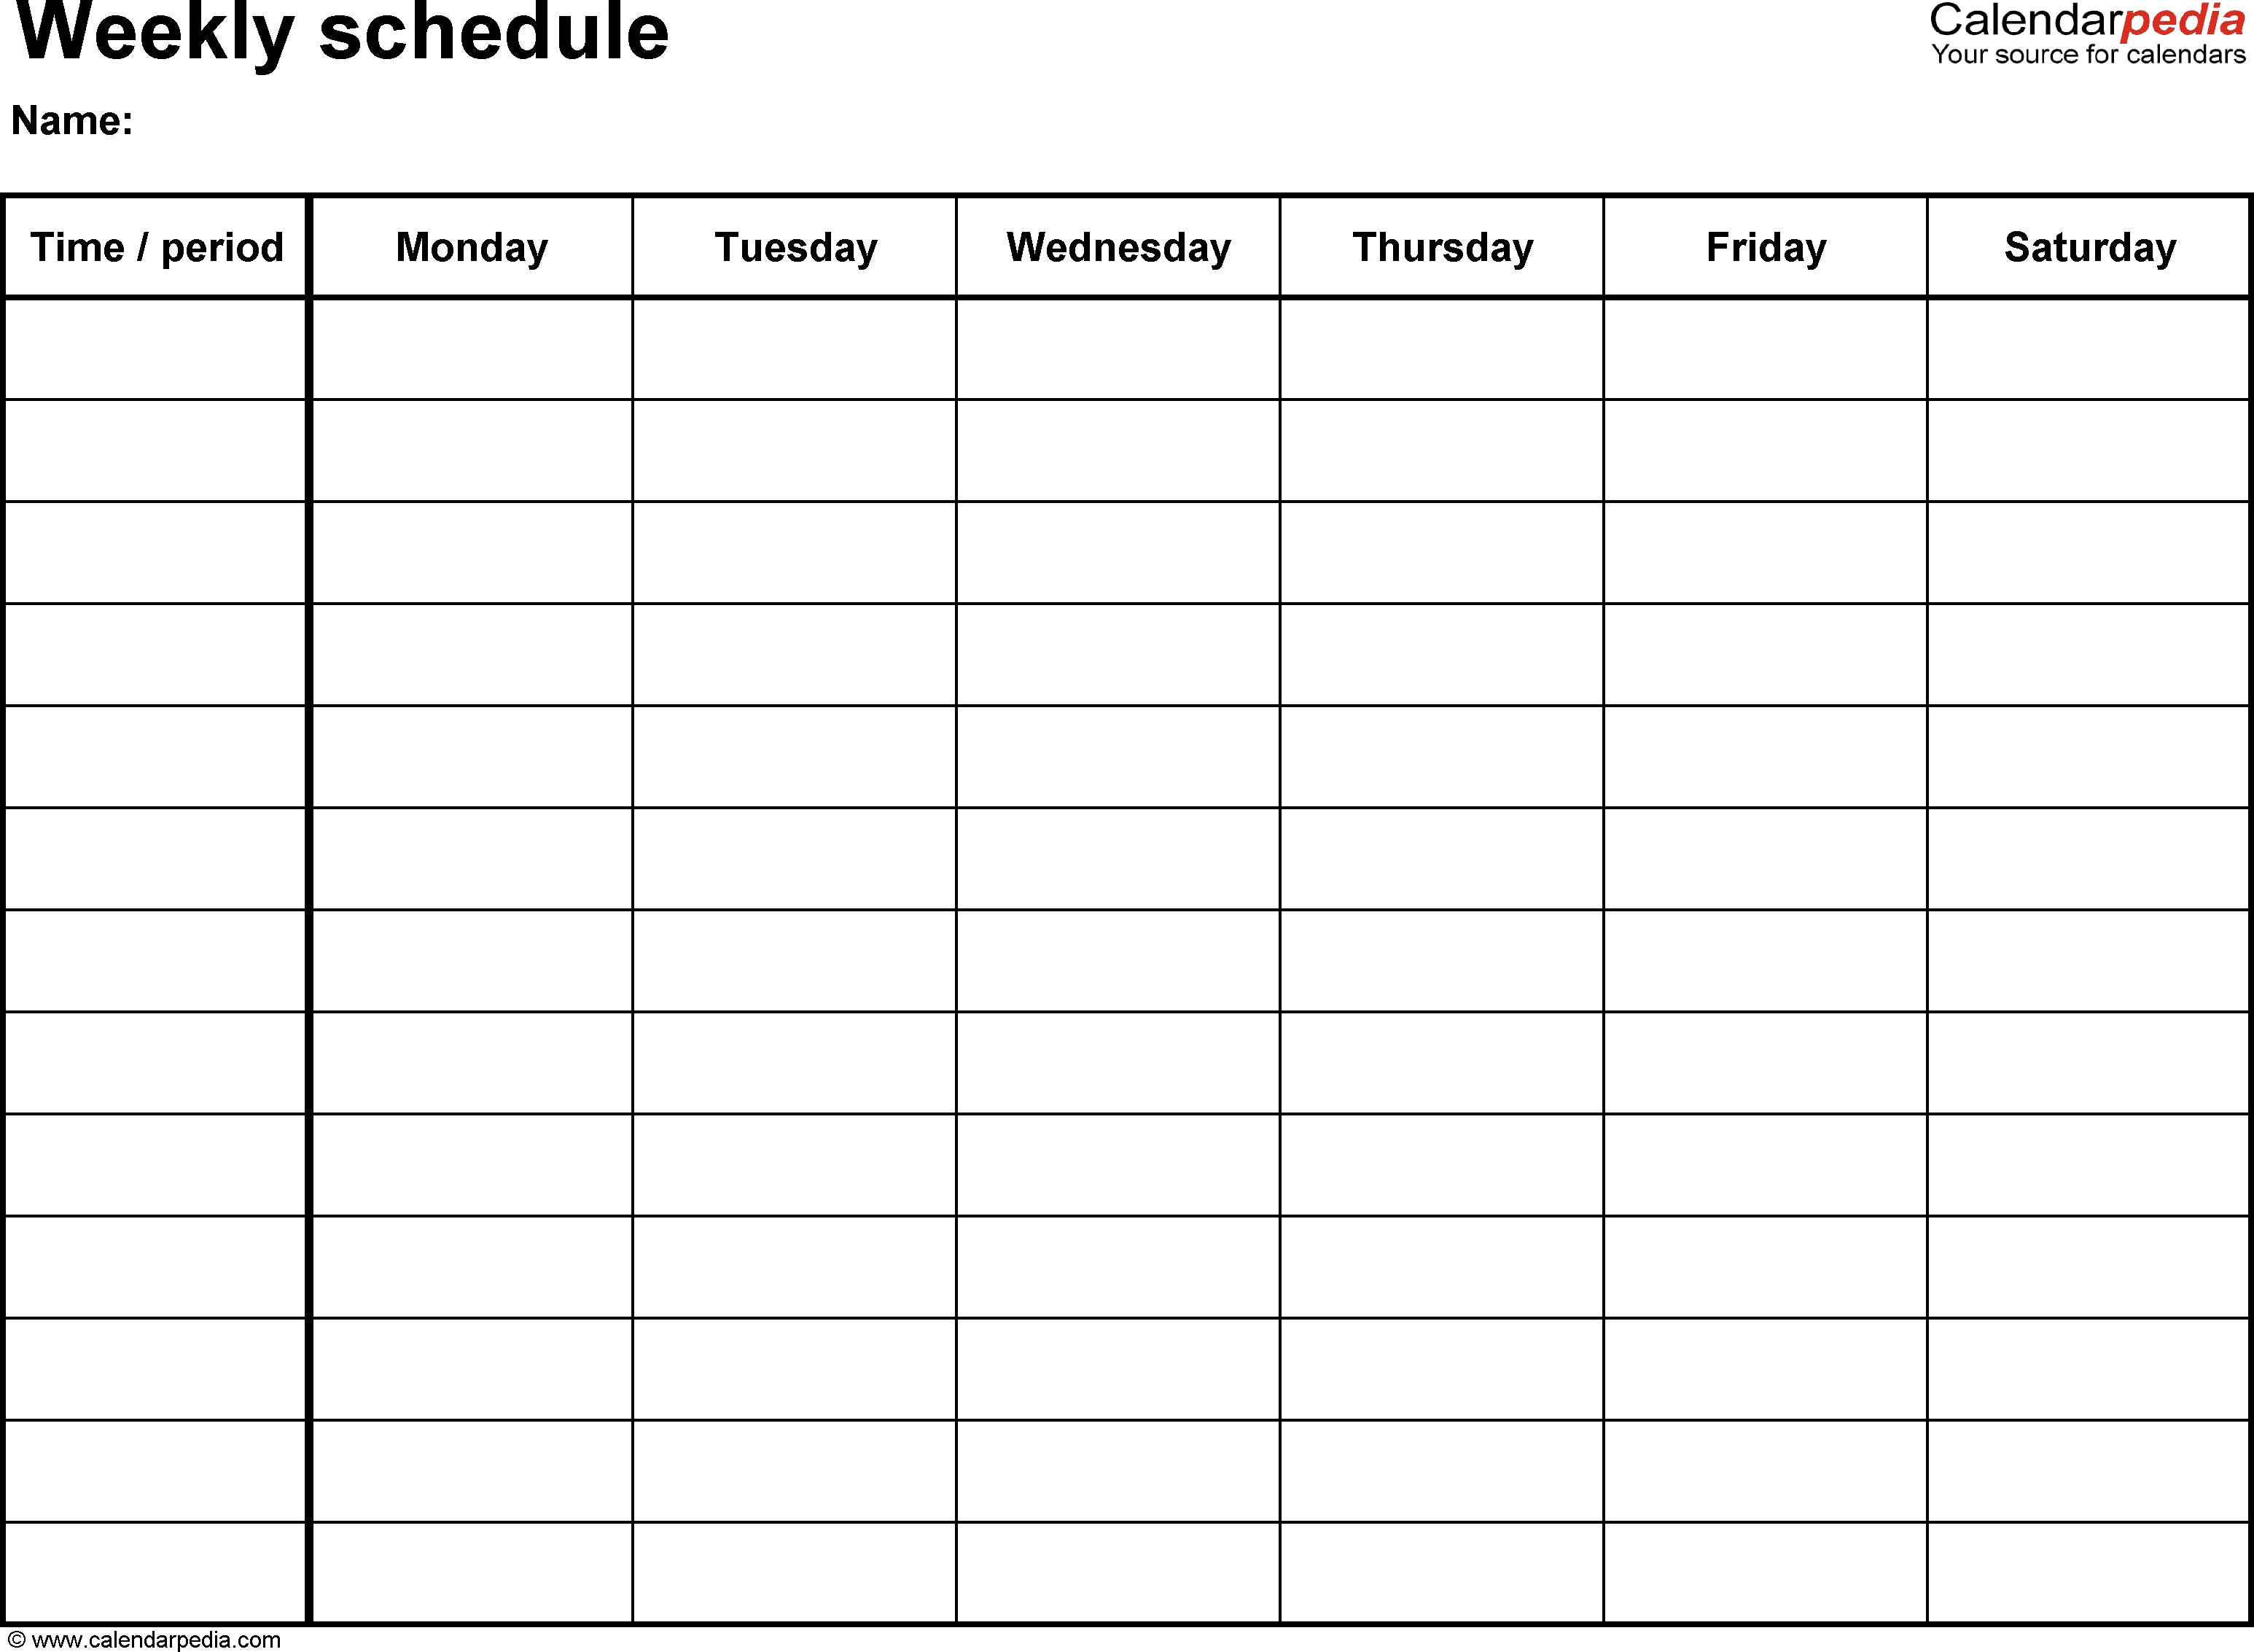 Free Weekly Schedule Templates For Pdf - 18 Templates in Free Printable Weekly Planner Calendar Template